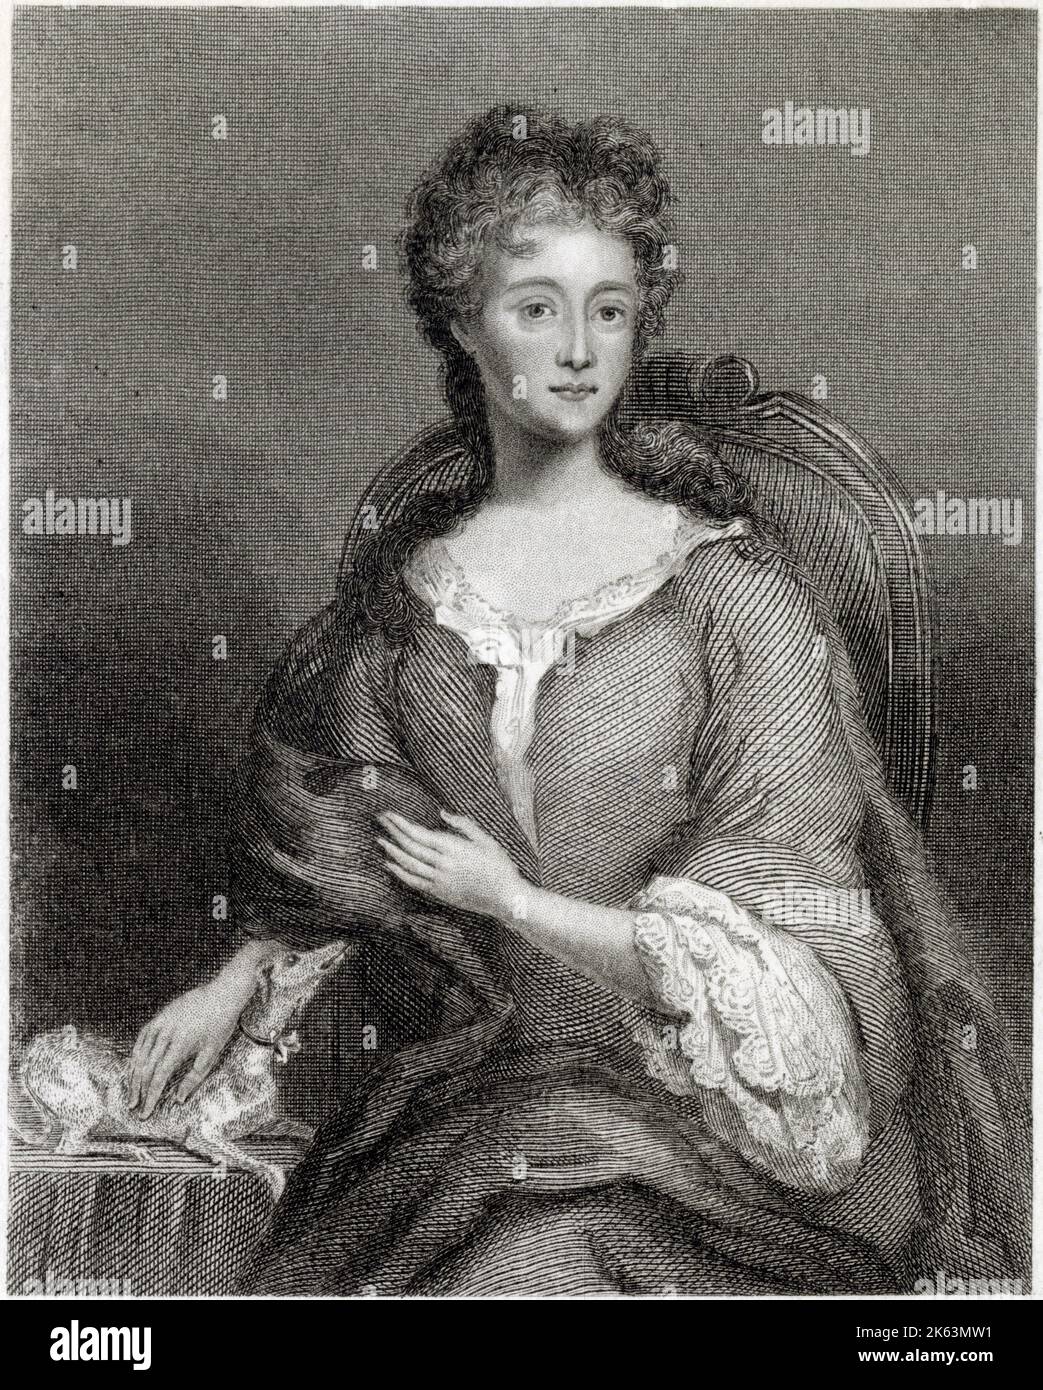 WINIFRED MAXWELL, COUNTESS OF NITHSDALE Wife of William Maxwell, 5th Earl of Nithsdale, English Jacobite. She helped him to escape from the Tower.     Date: ? - 1749 Stock Photo